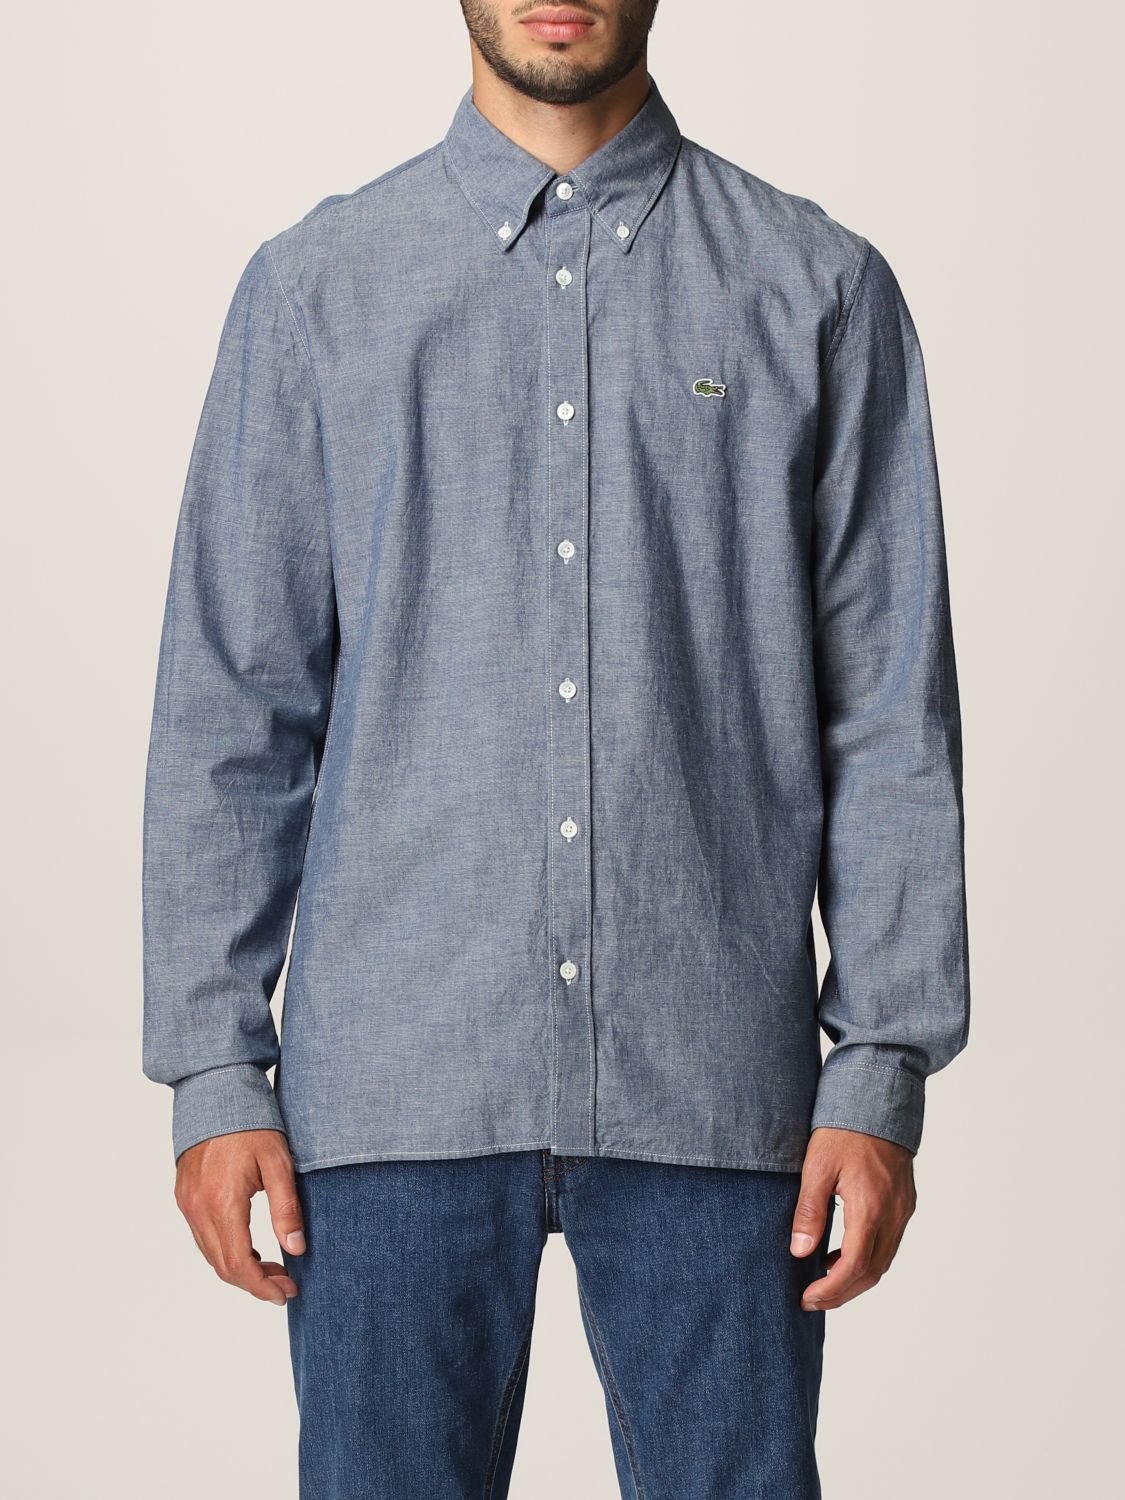 LACOSTE: shirt for man - Blue | Lacoste shirt CH2967 online at GIGLIO.COM